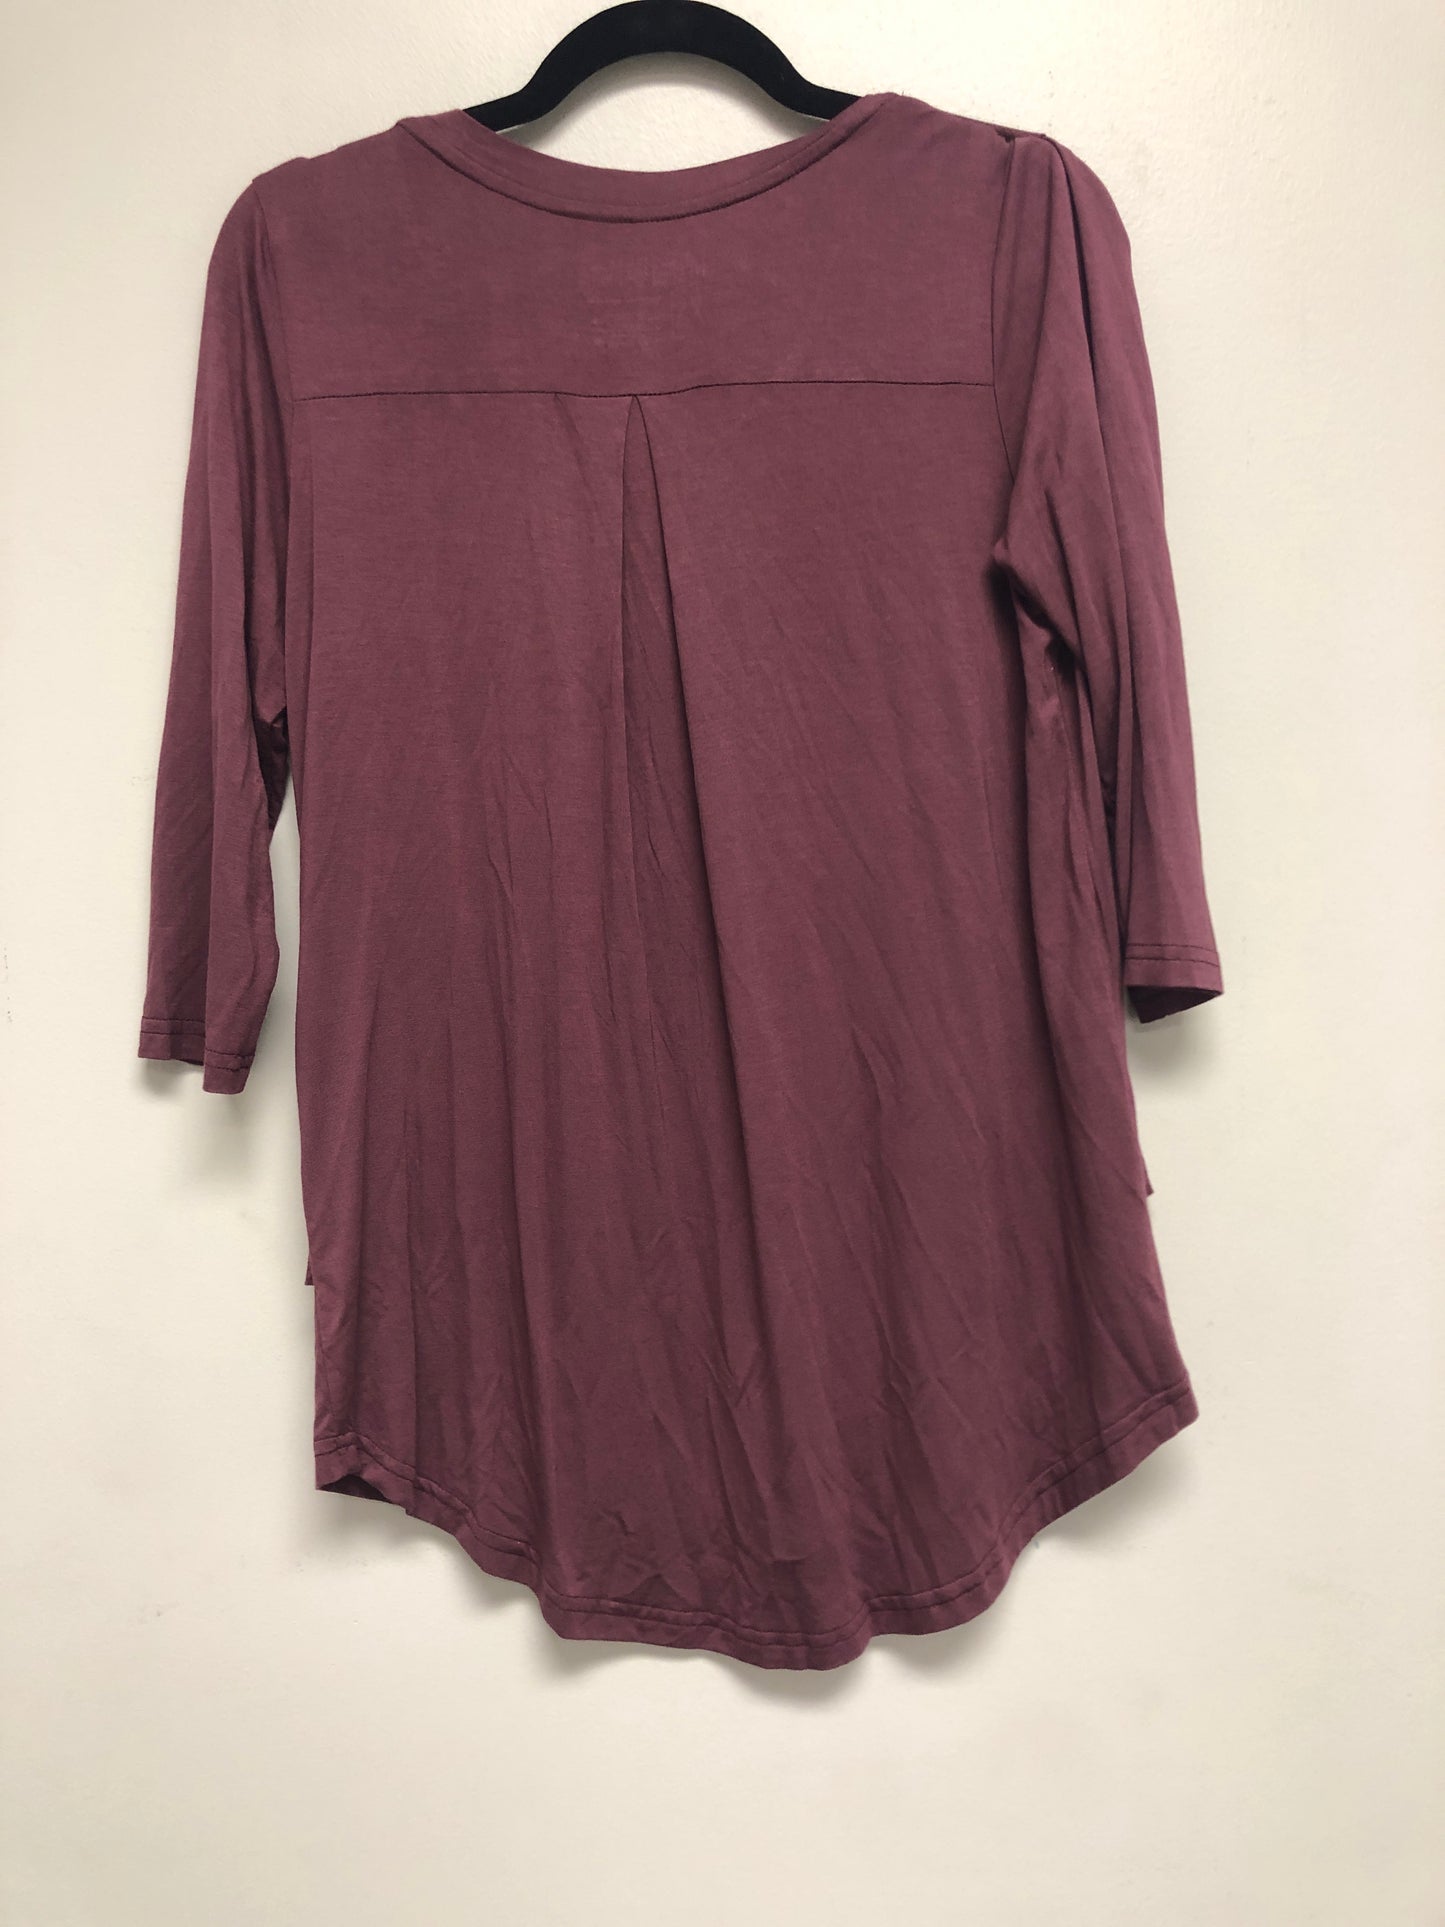 Outlet 6416 - Latched Mama 3/4 Sleeve Scoop Neck Nursing Top 2.0 - Wine - Extra Small